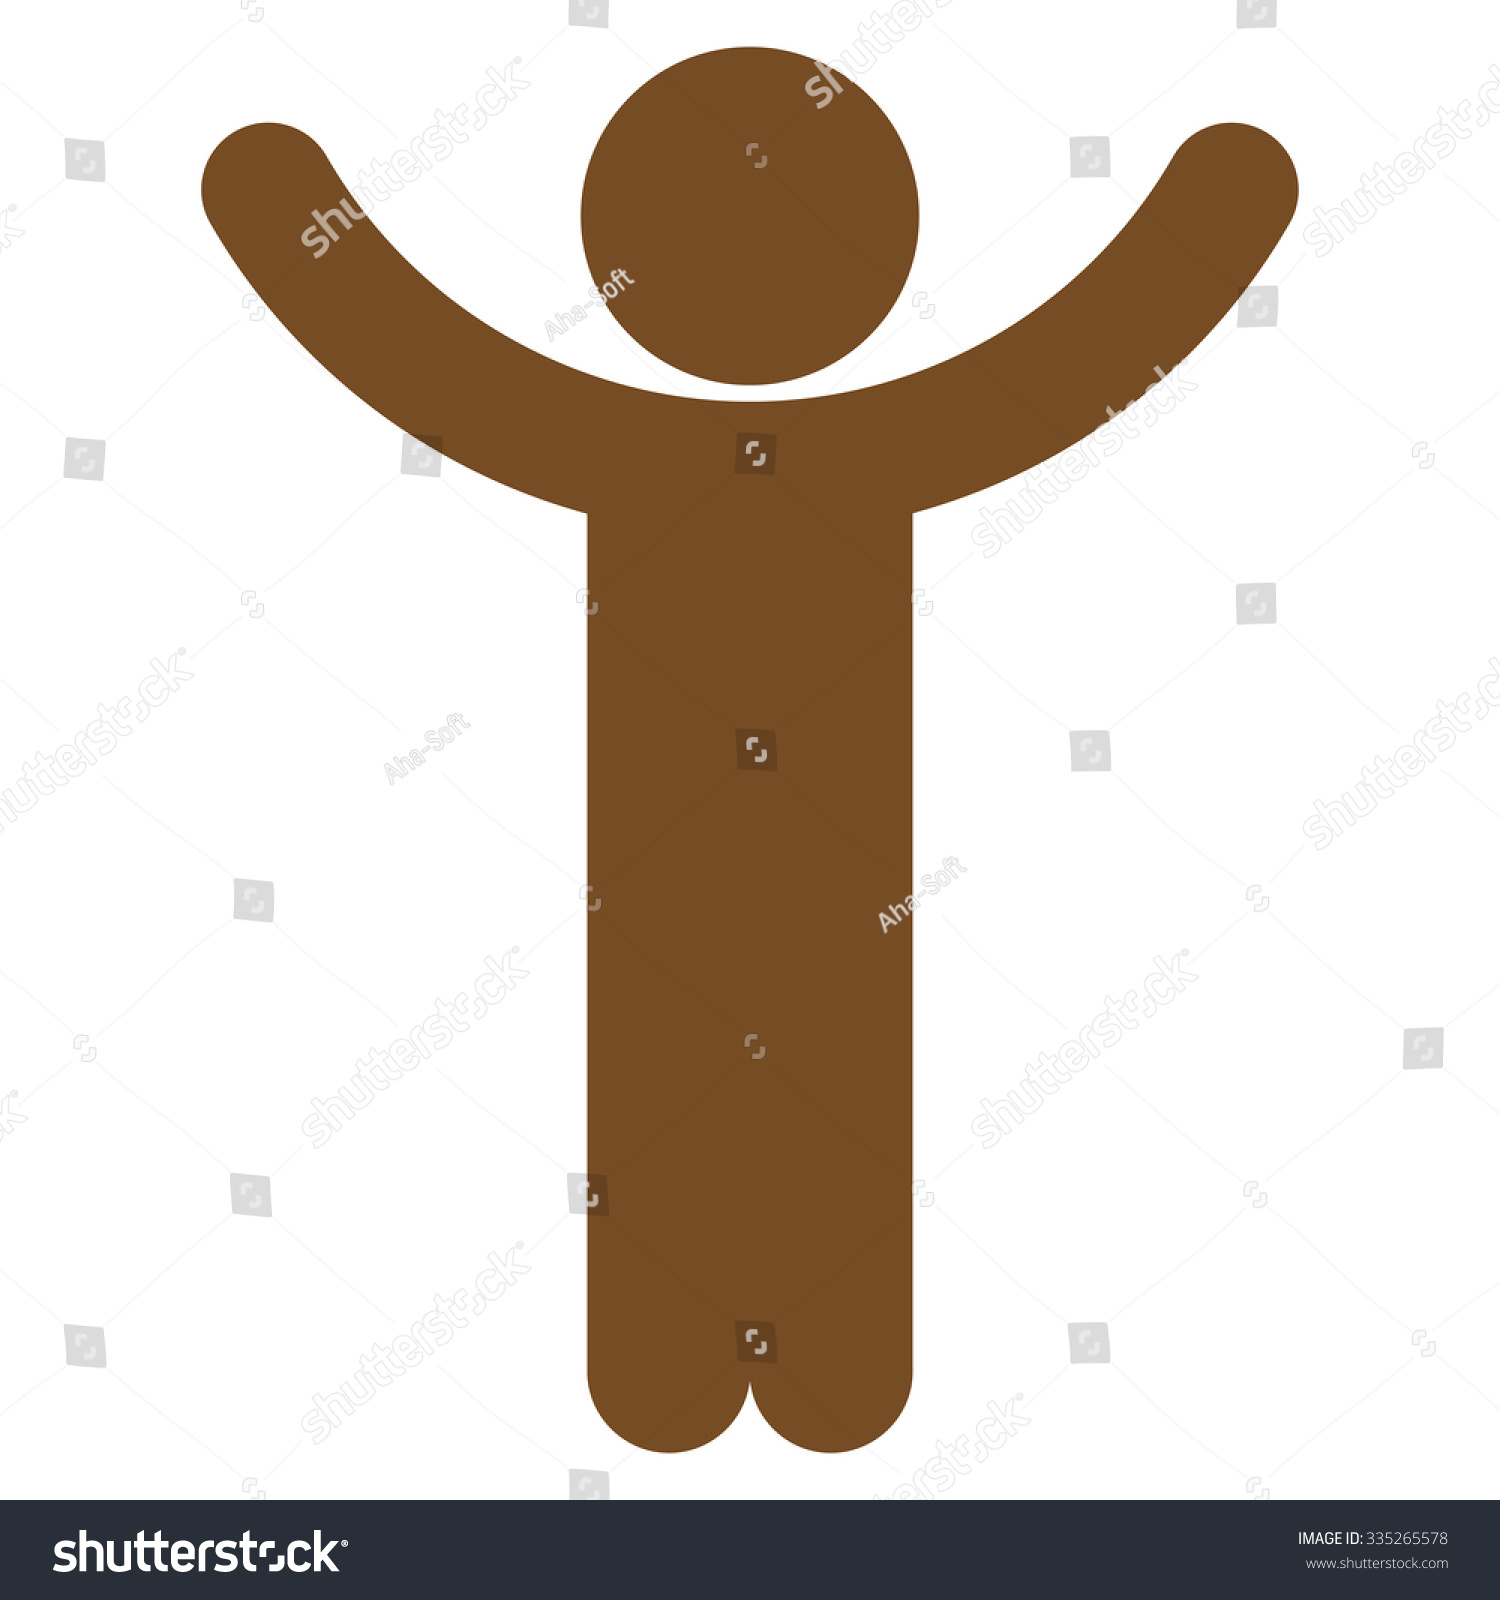 Hands Man Silhouette Vector Icon Style Stock Vector Royalty Free Shutterstock